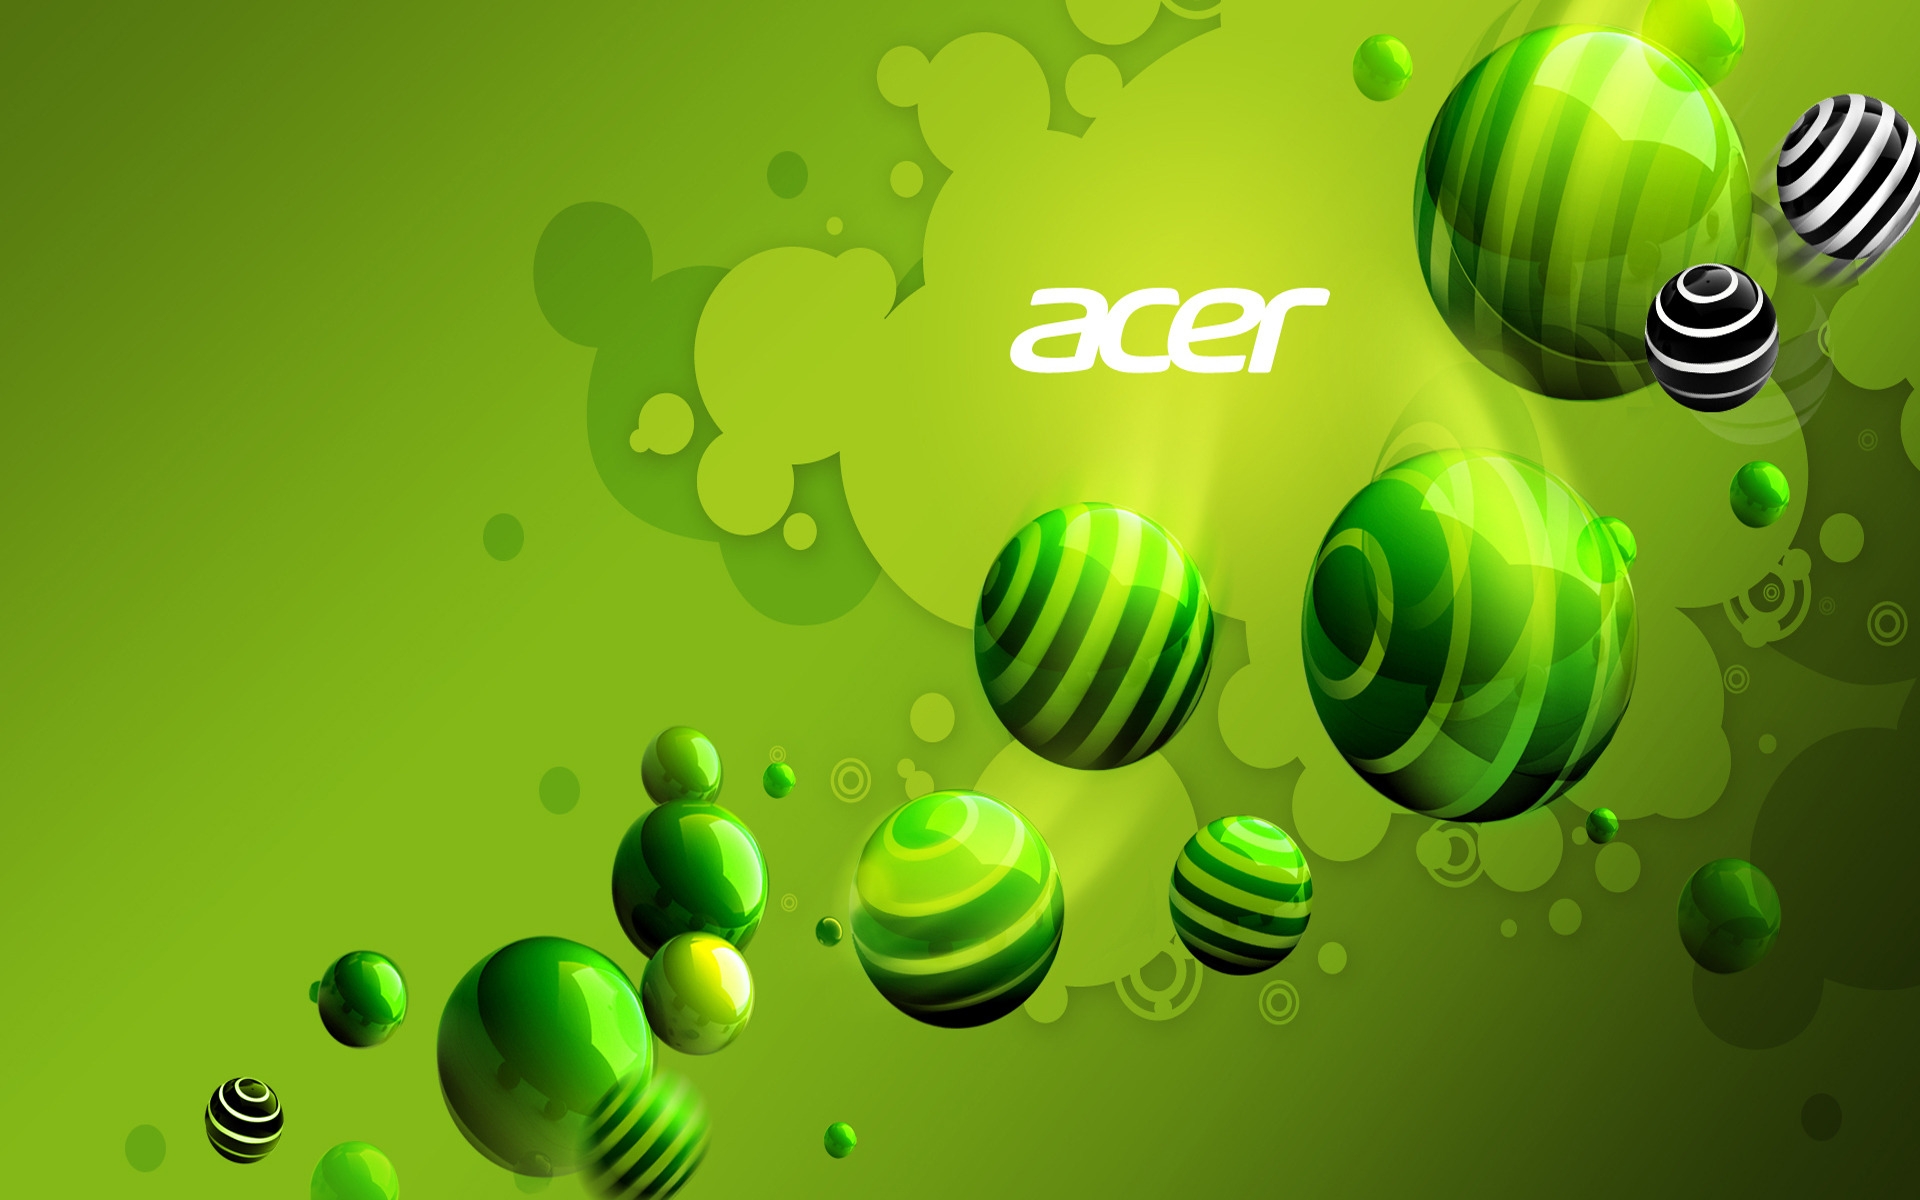 Acer Green World for 1920 x 1200 widescreen resolution